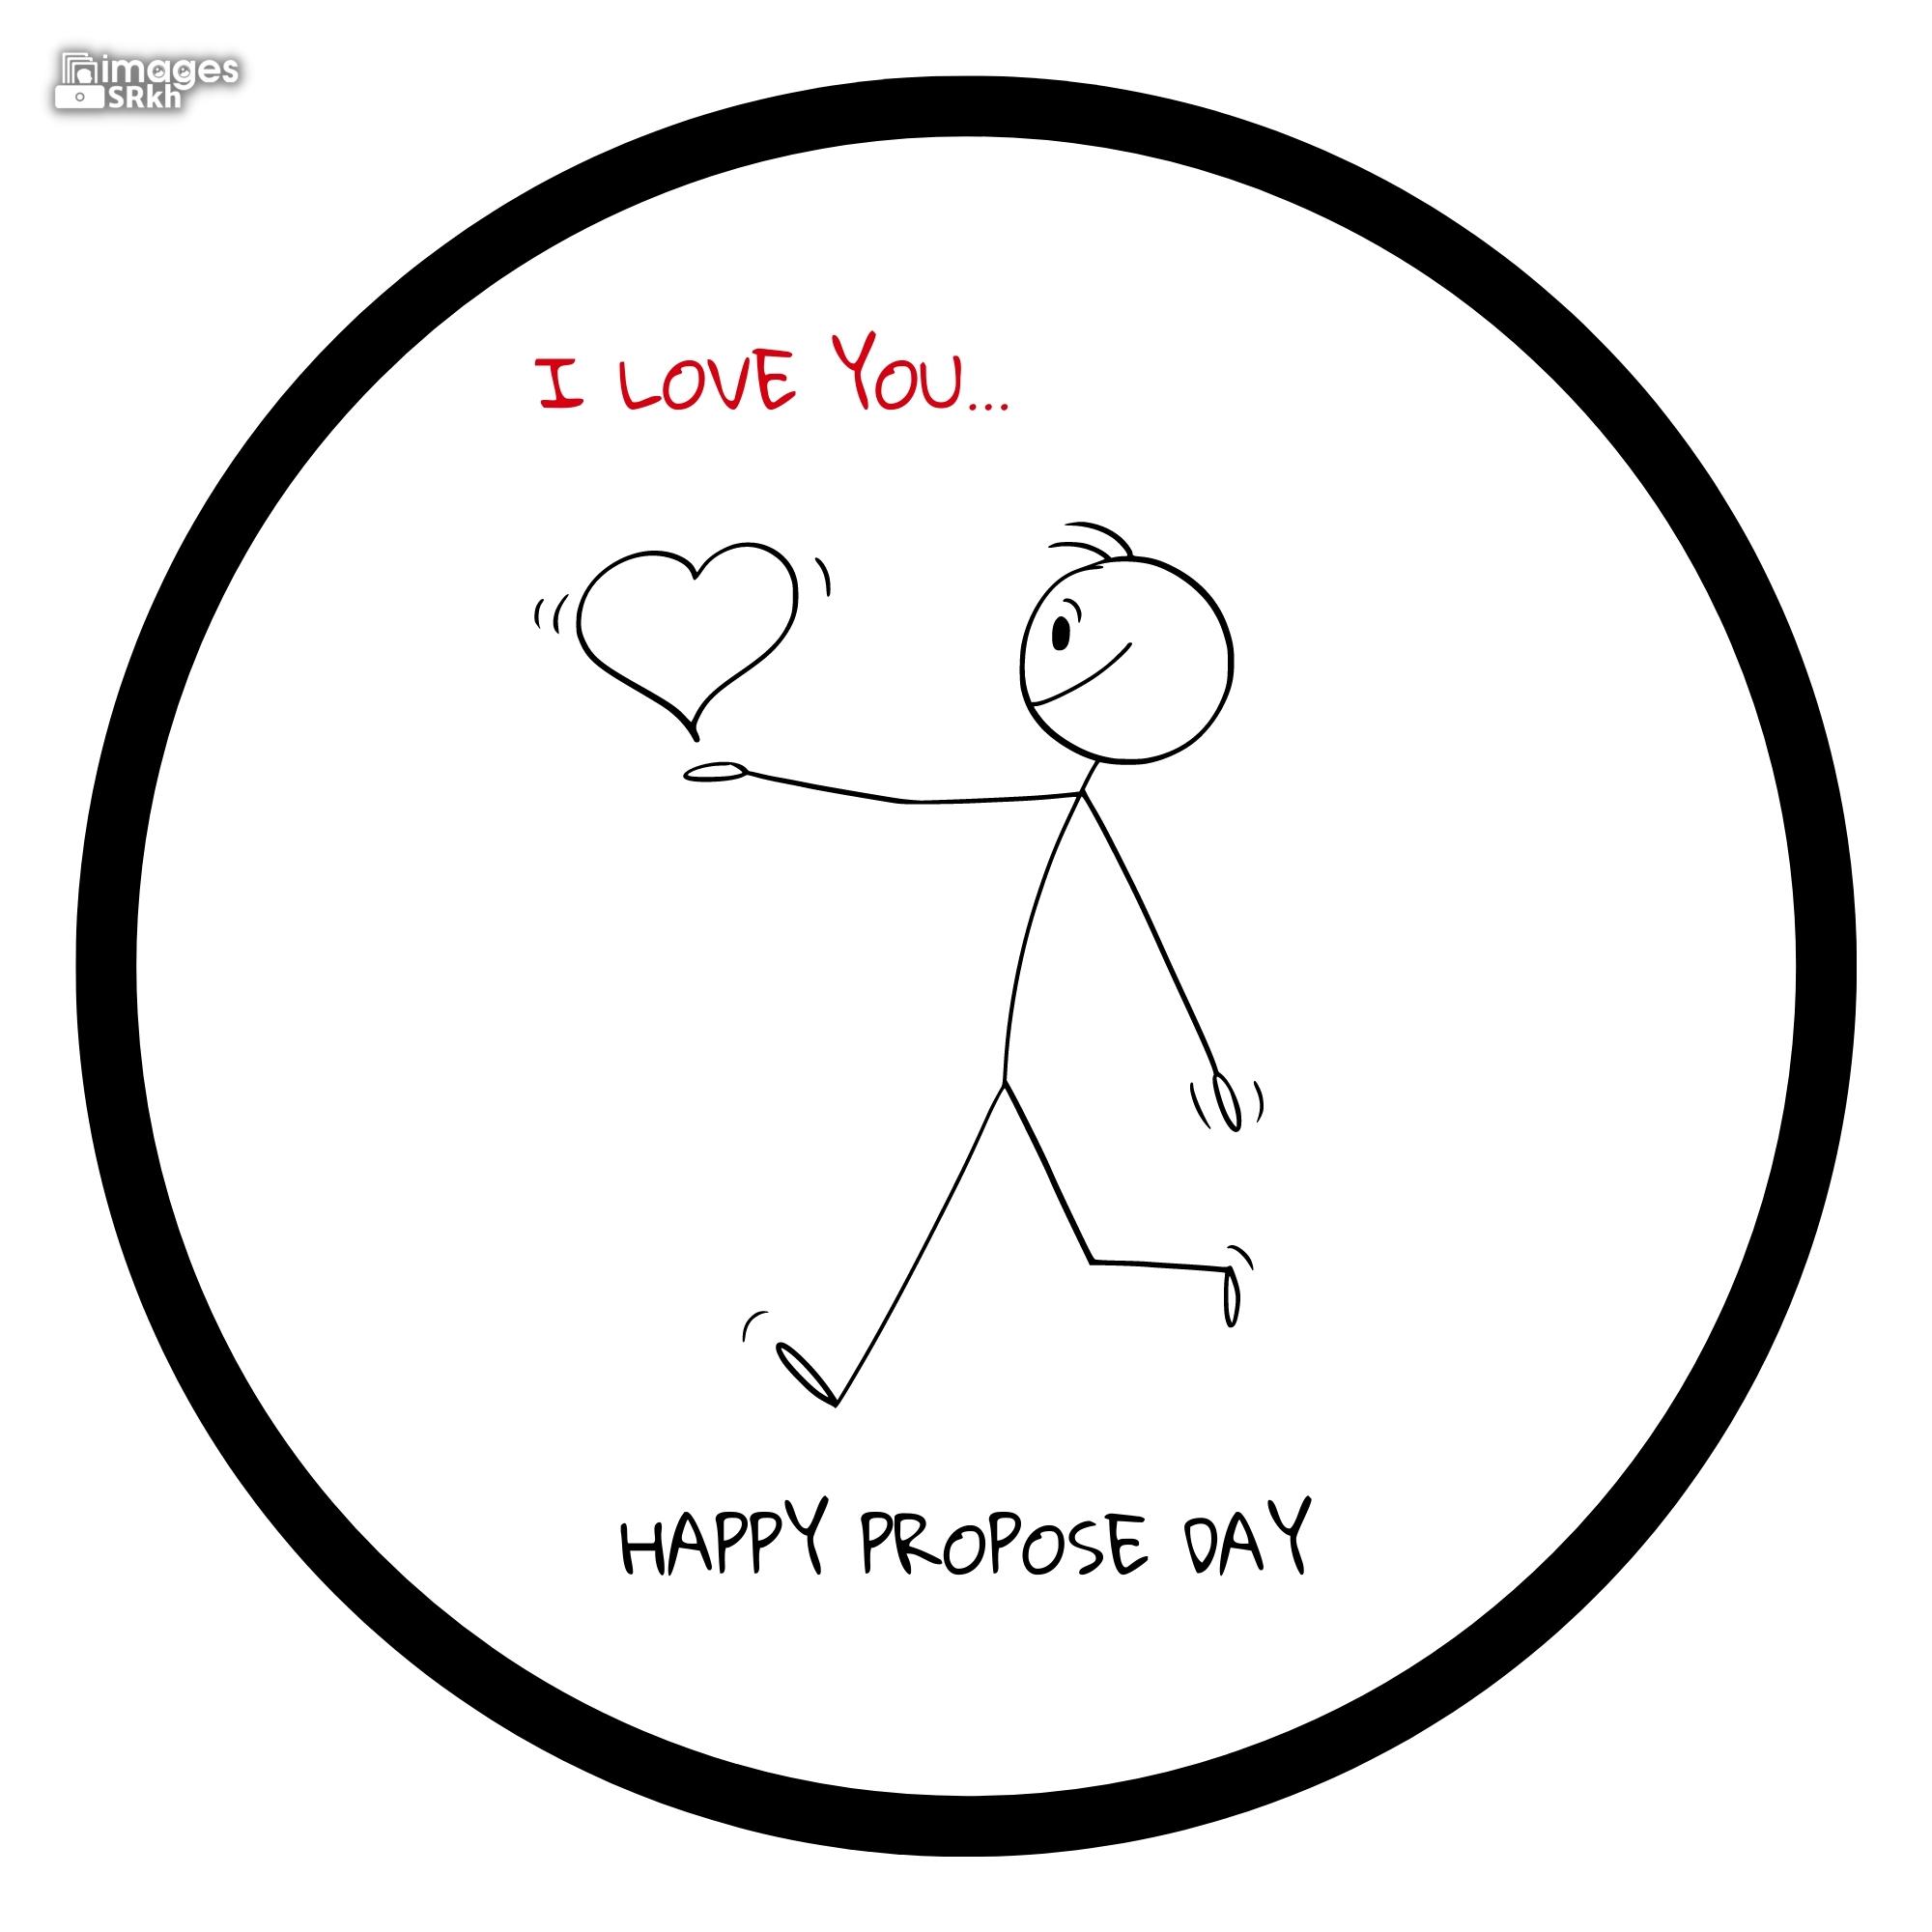 Happy Propose Day Images | 395 | I LOVE YOU